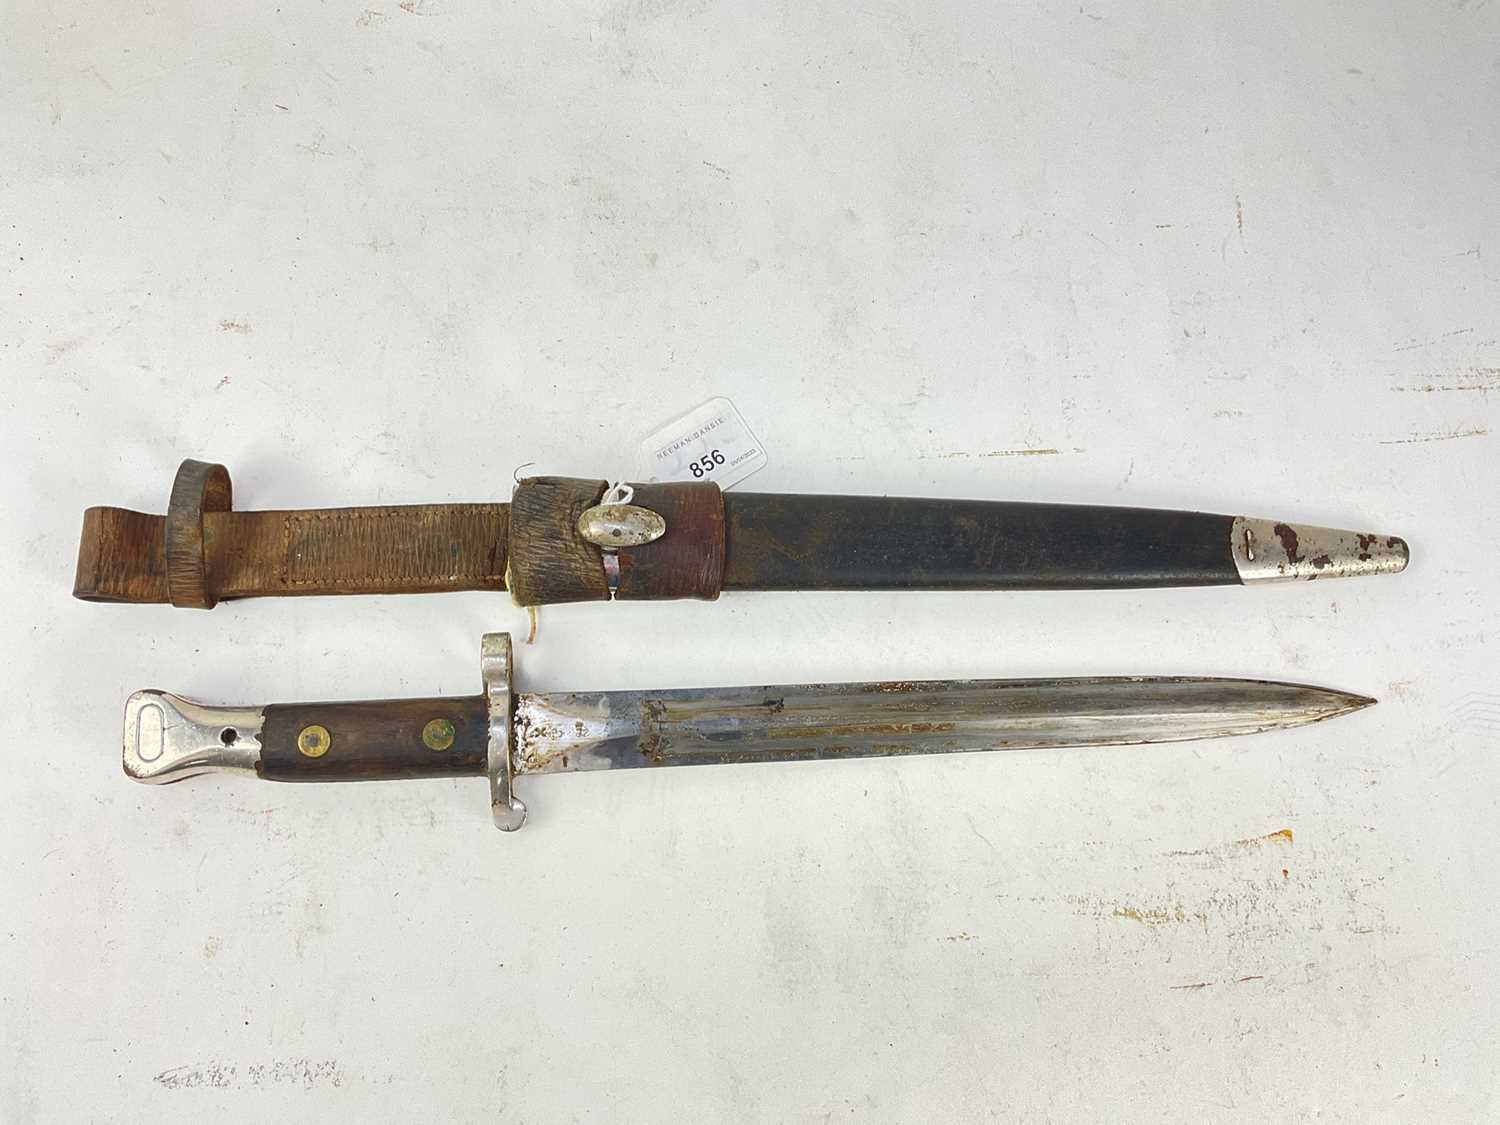 Lot 856 - Boer War era British Lee Metford 1888 pattern bayonet in leather scabbard with plated metal mounts, and leather frog.